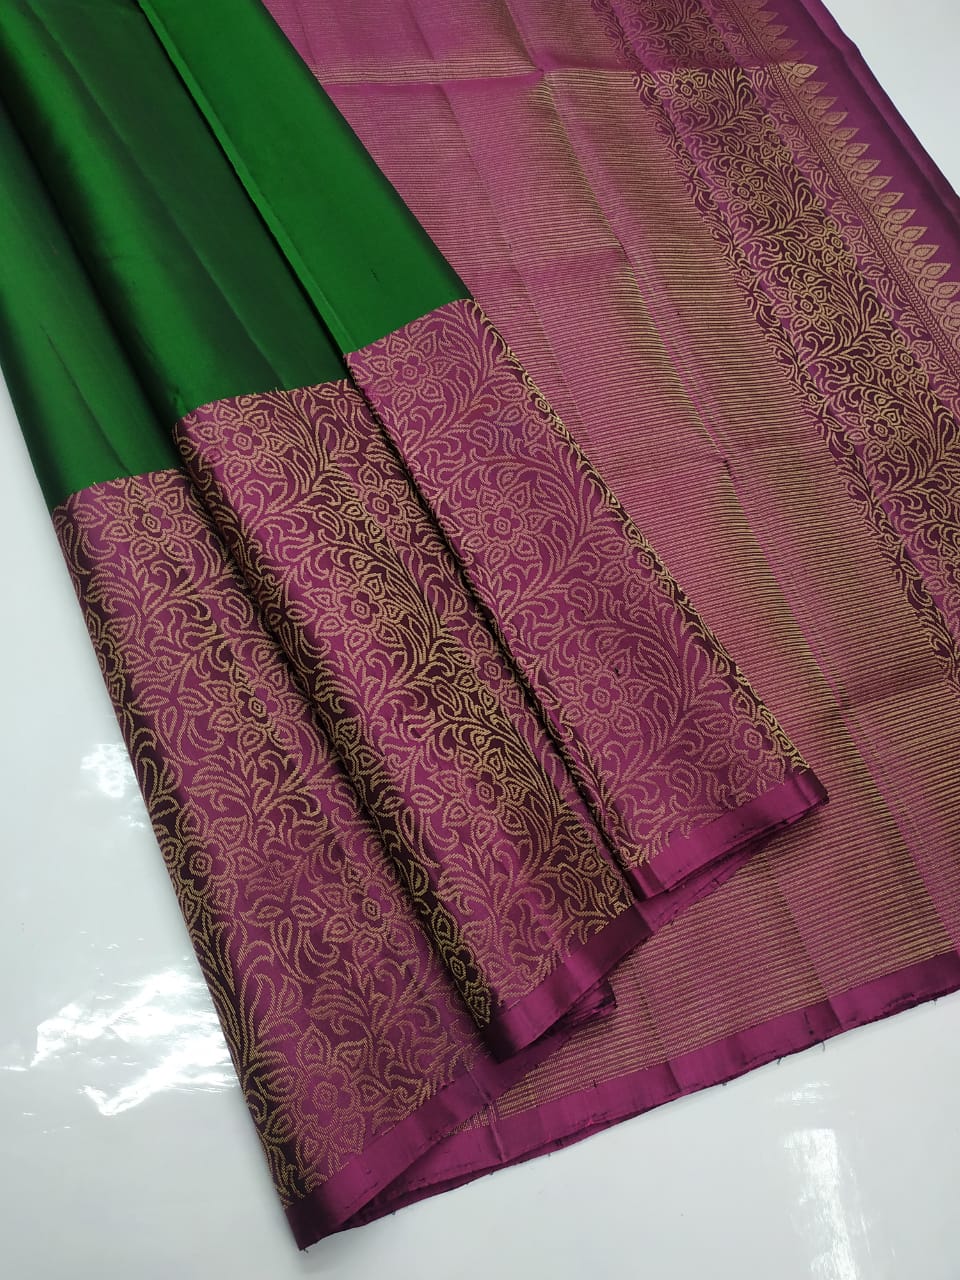 Silk Saree Suppliers 19169331 - Wholesale Manufacturers and Exporters